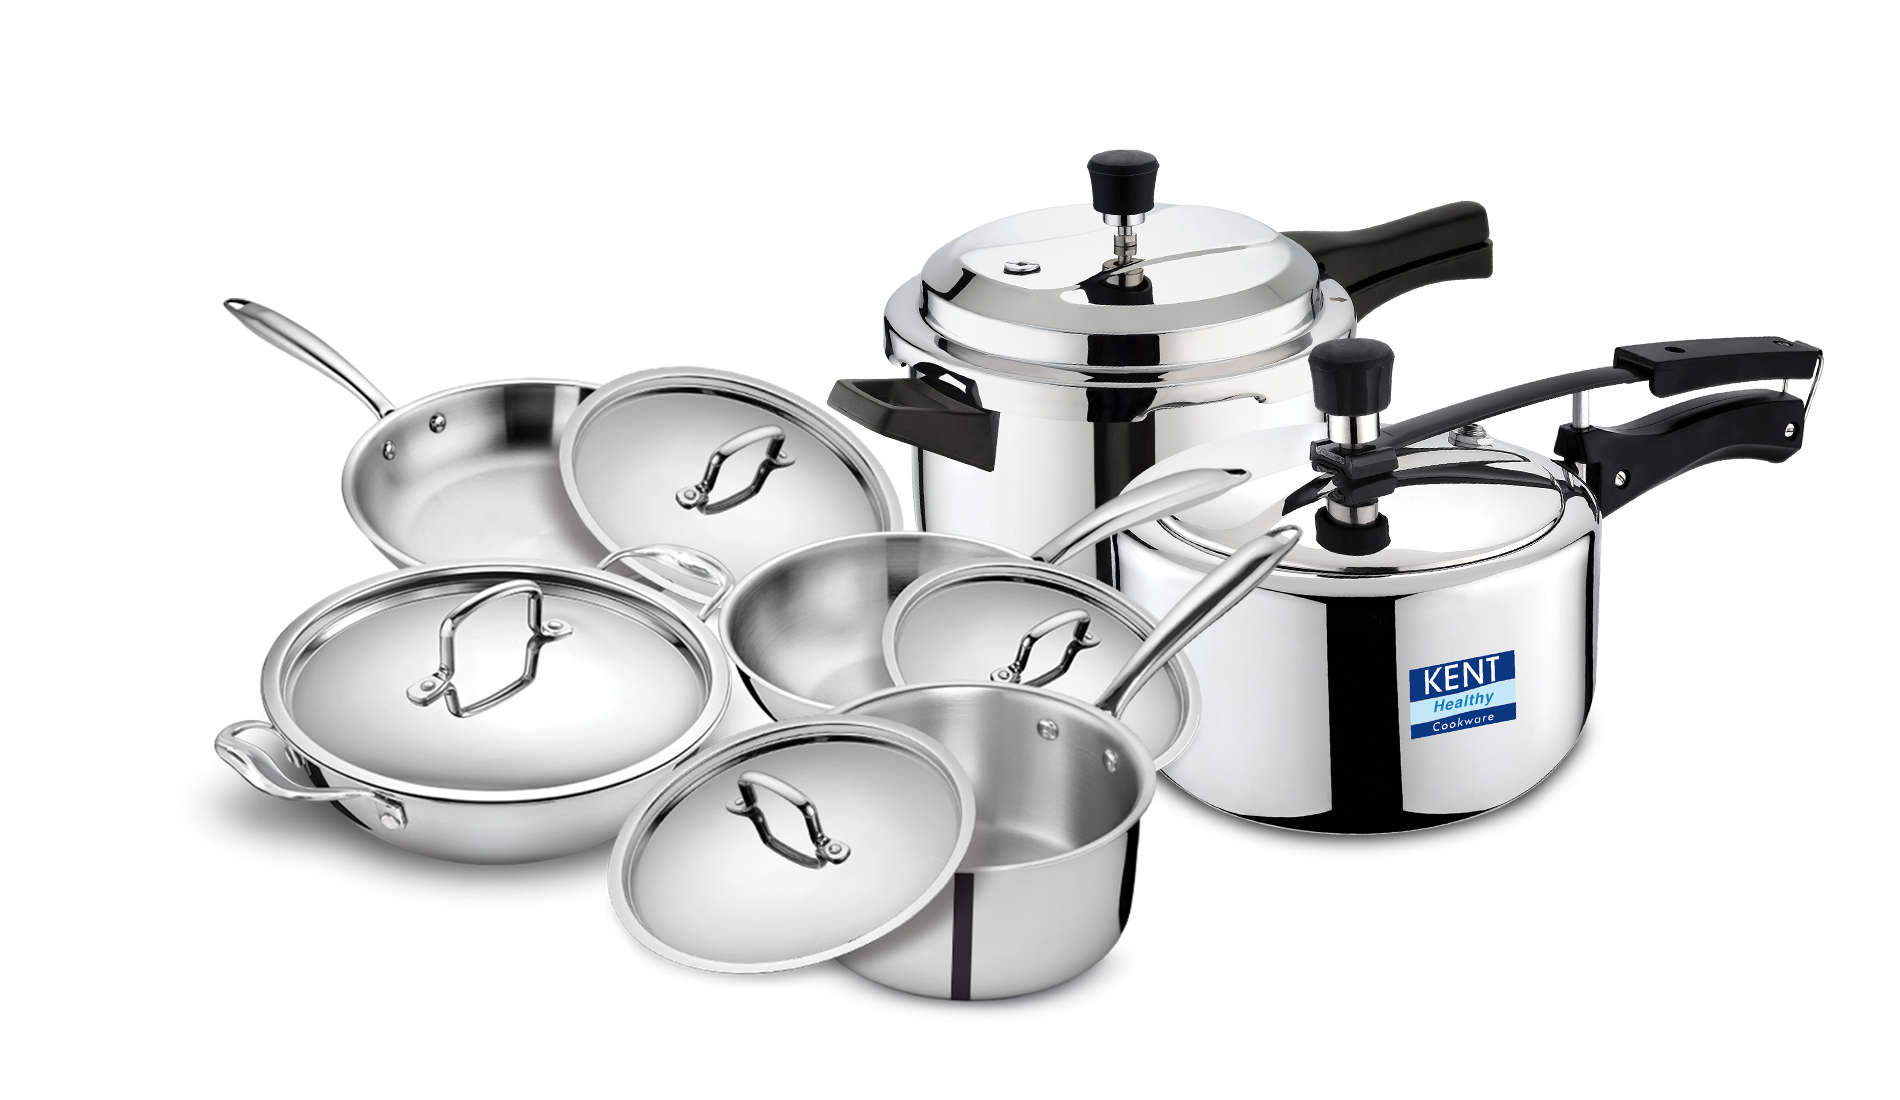 Buy Tri Ply Stainless Steel Cookware Online at Low Prices in India